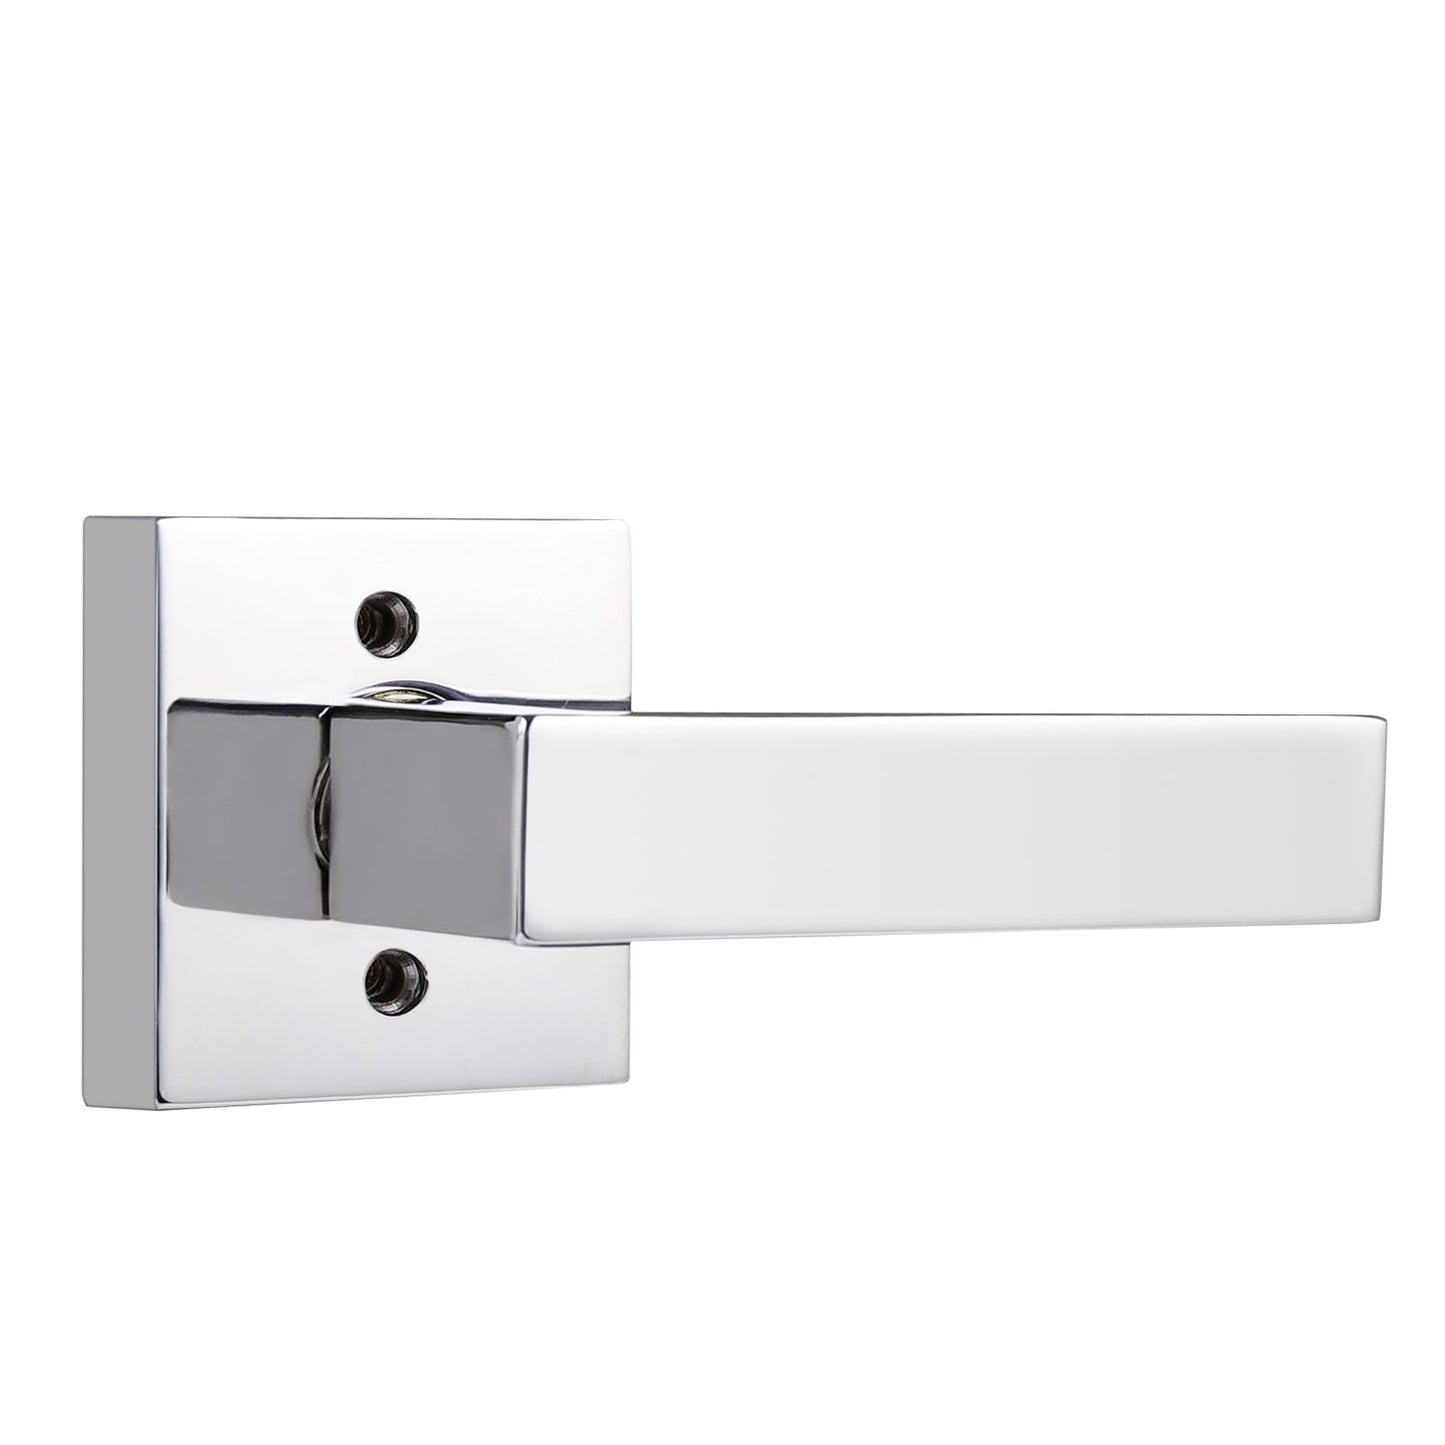 Heavy Duty Door Handles with Square Design Polished Chrome Finish DL01PC - Probrico